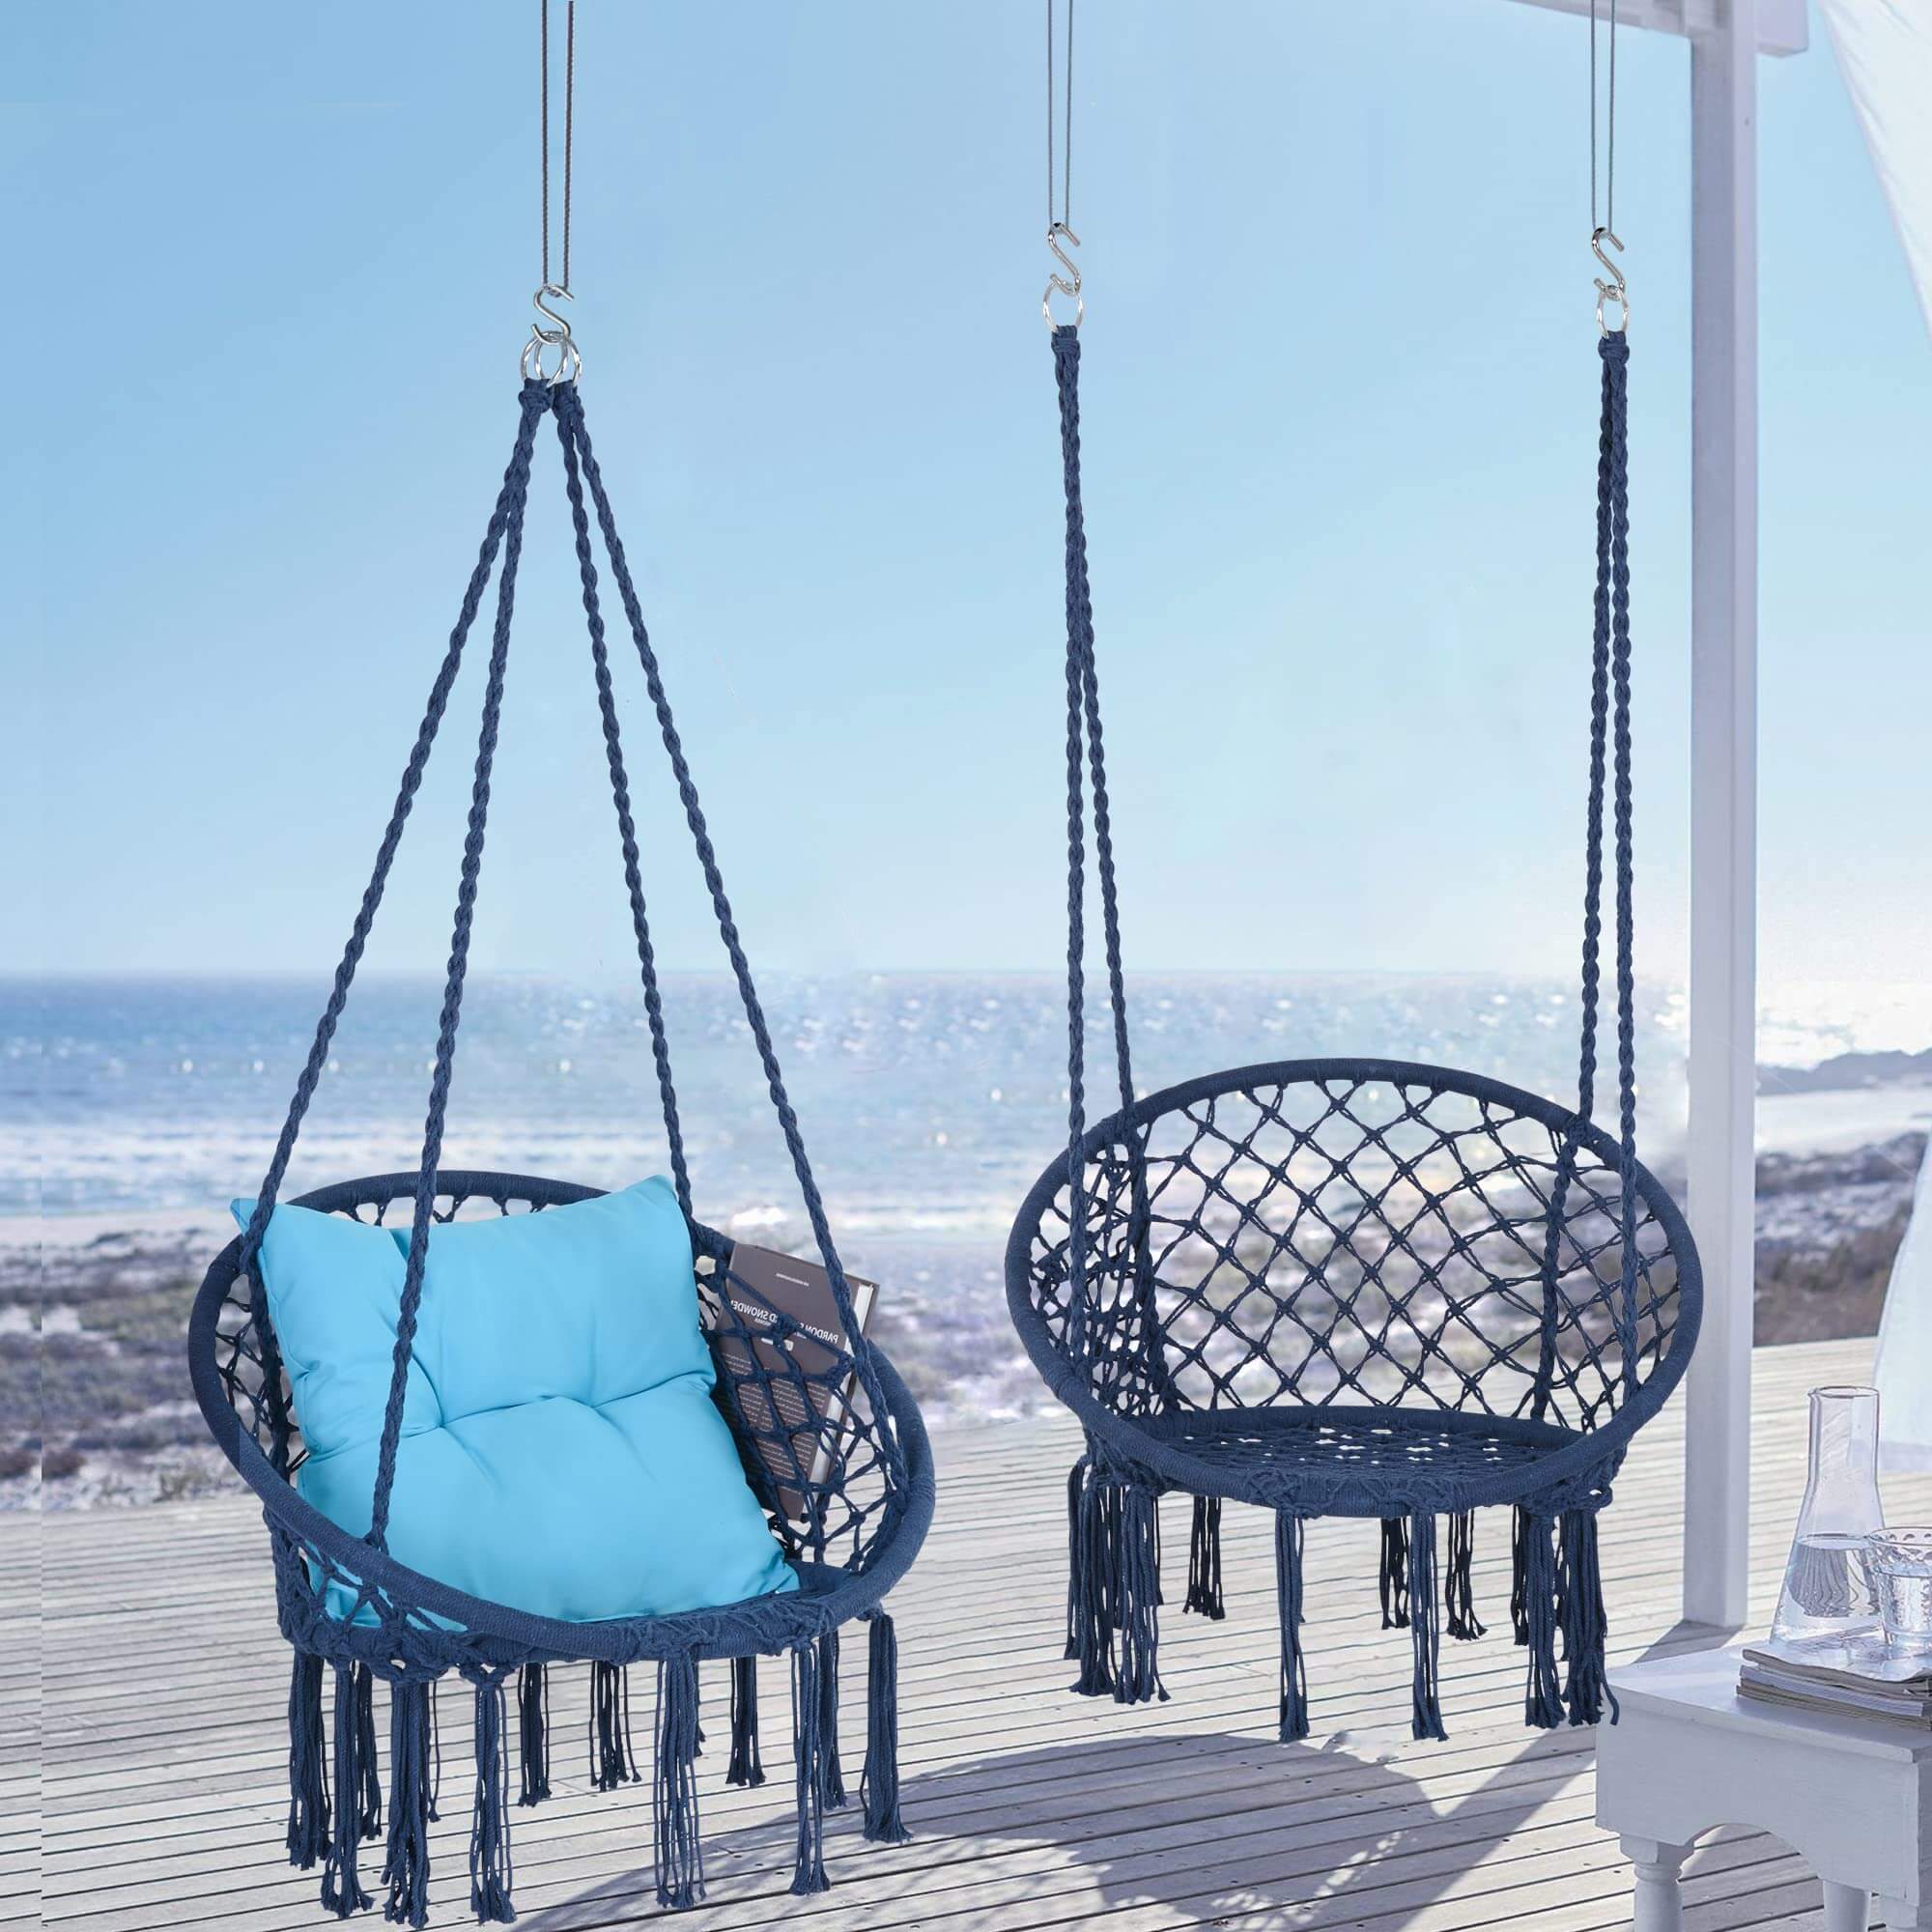 Macrame Cotton Rope Hammock Chair Swing#color_blue-pack-of-2